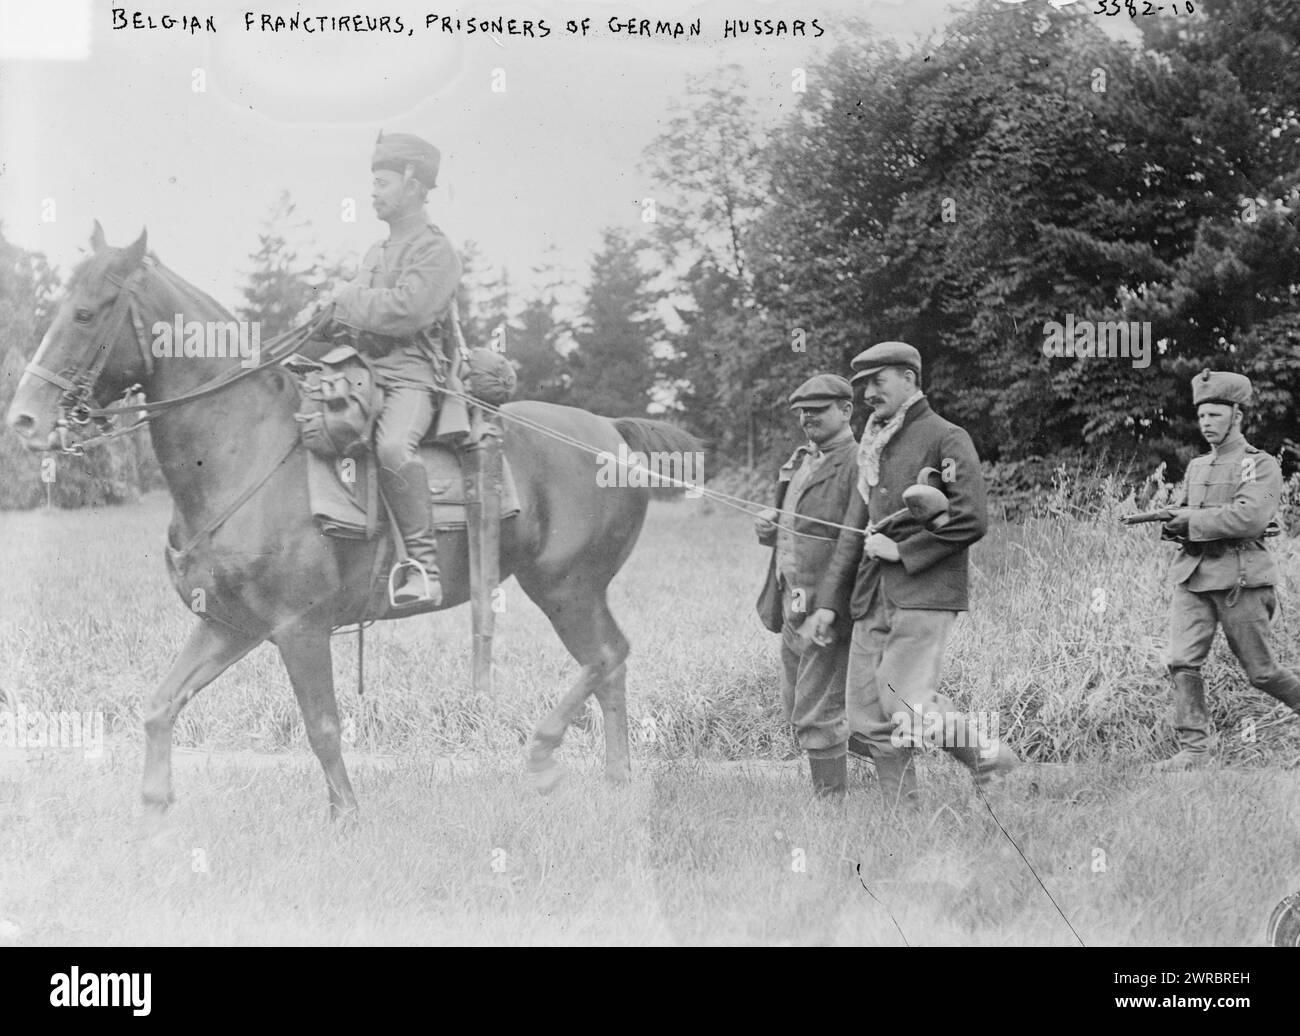 Belgian Franctireurs, prisoners of German Hussars, Photograph shows Belgian resistance fighters who fought against the German occupation during World War I., between 1914 and ca. 1915, World War, 1914-1918, Glass negatives, 1 negative: glass Stock Photo